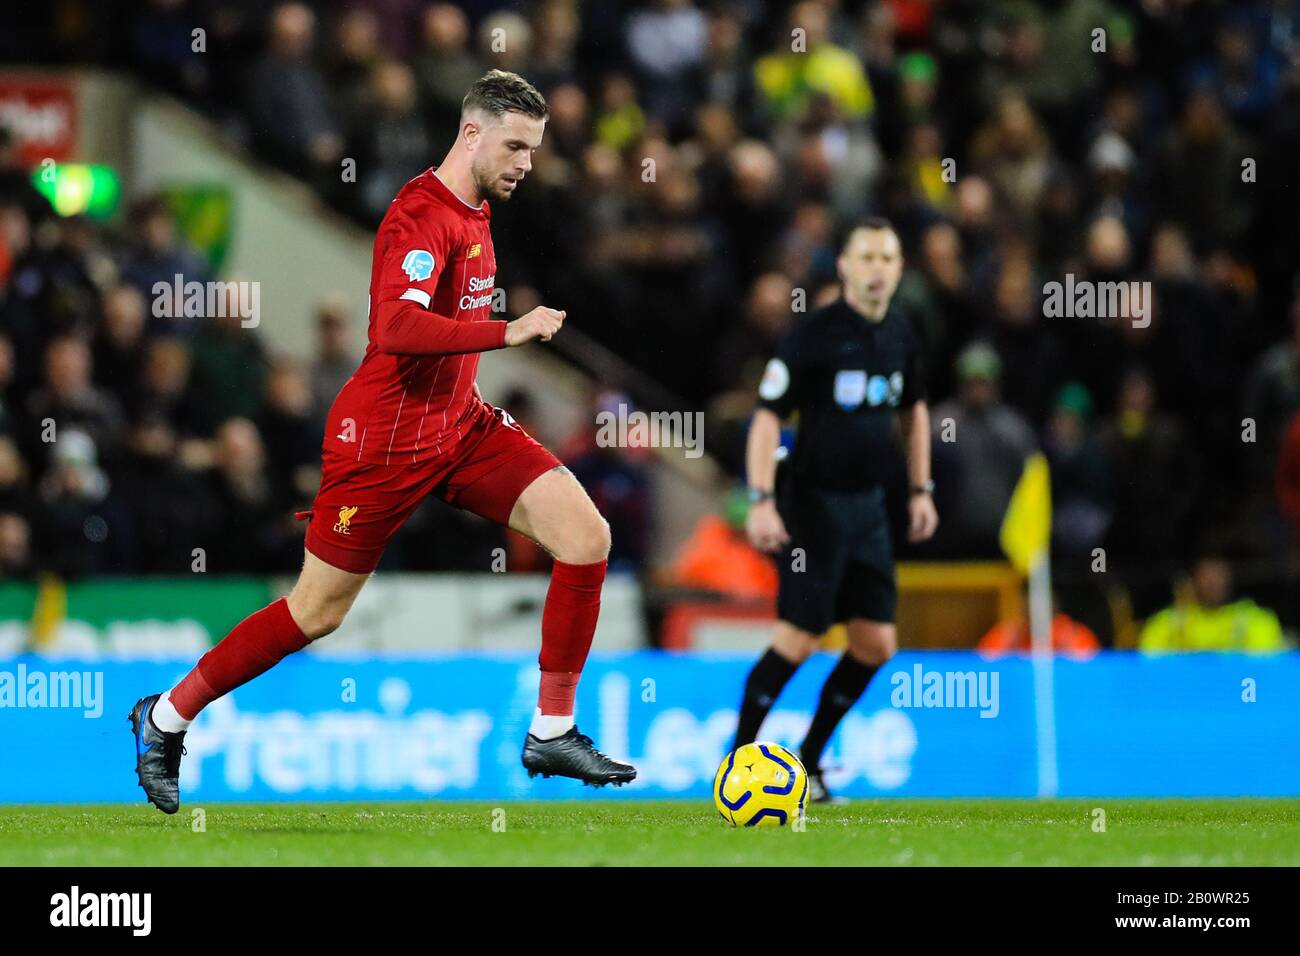 15th February 2020, Carrow Road, Norwich, England; Premier League, Norwich City v Liverpool : Jordan Henderson (14) of Liverpool with the ball Stock Photo